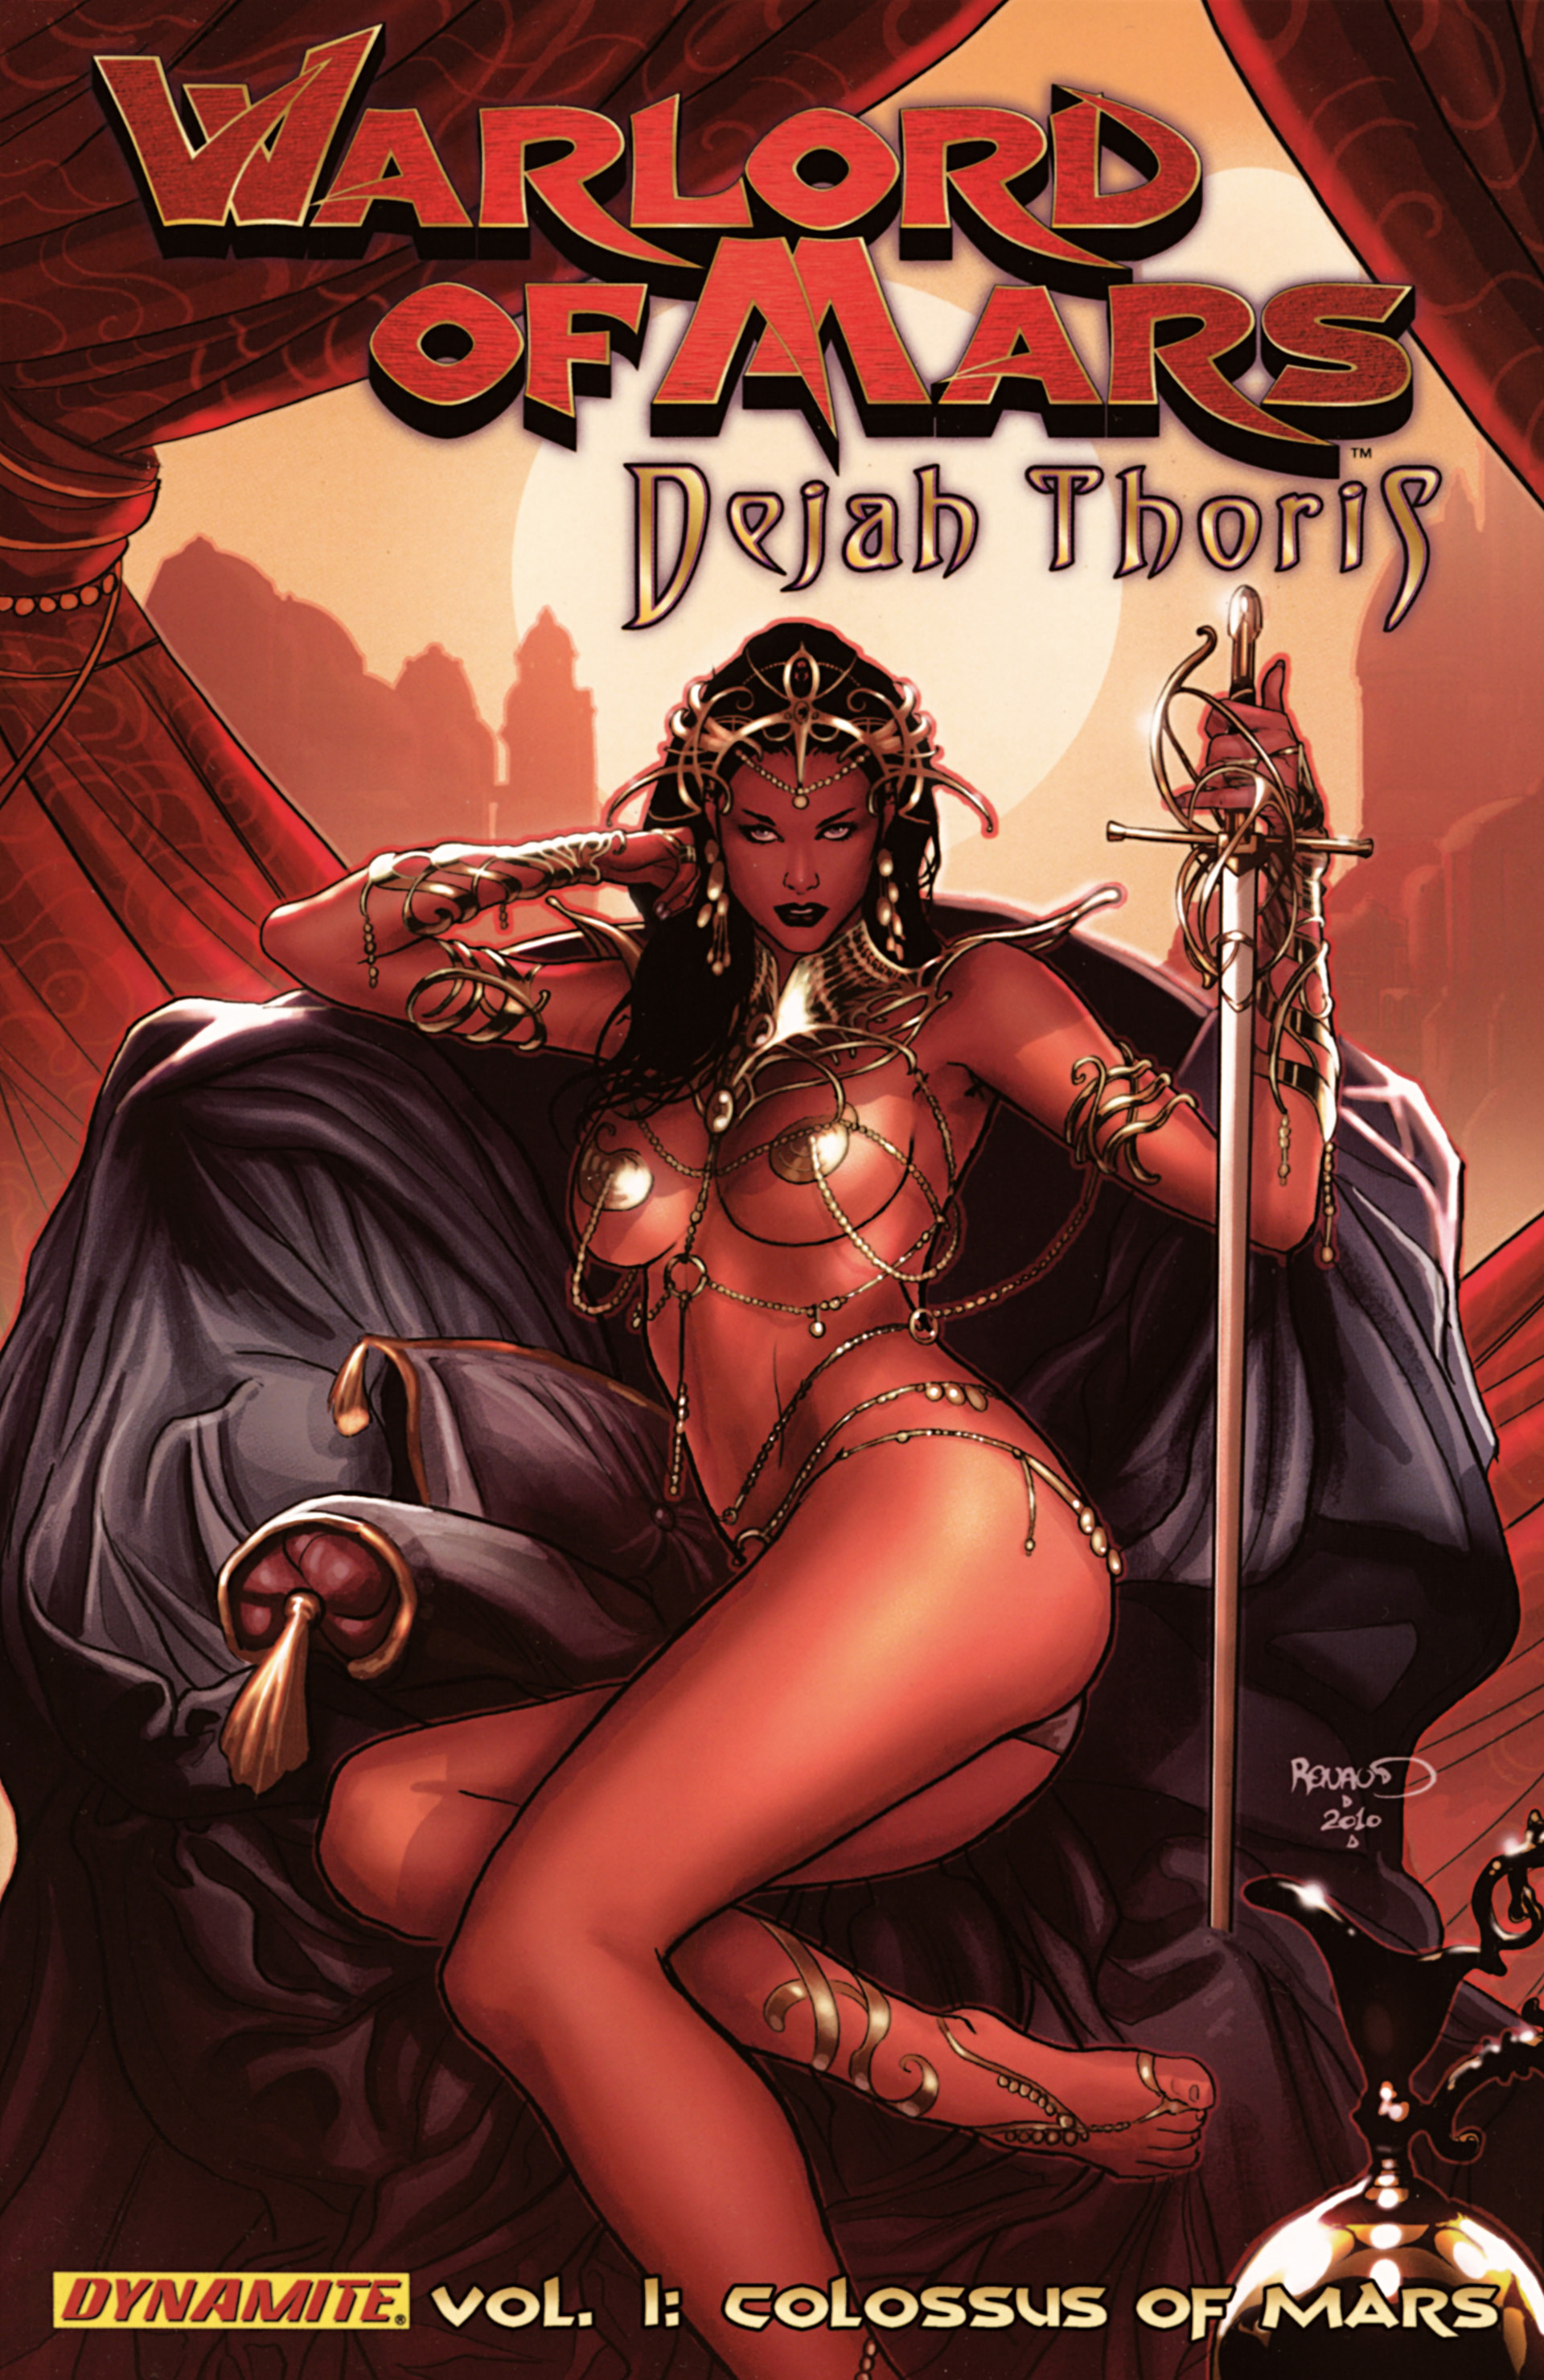 Warlord of Mars Dejah Thoris Vol 1 The Colossus of Mars by Renaut